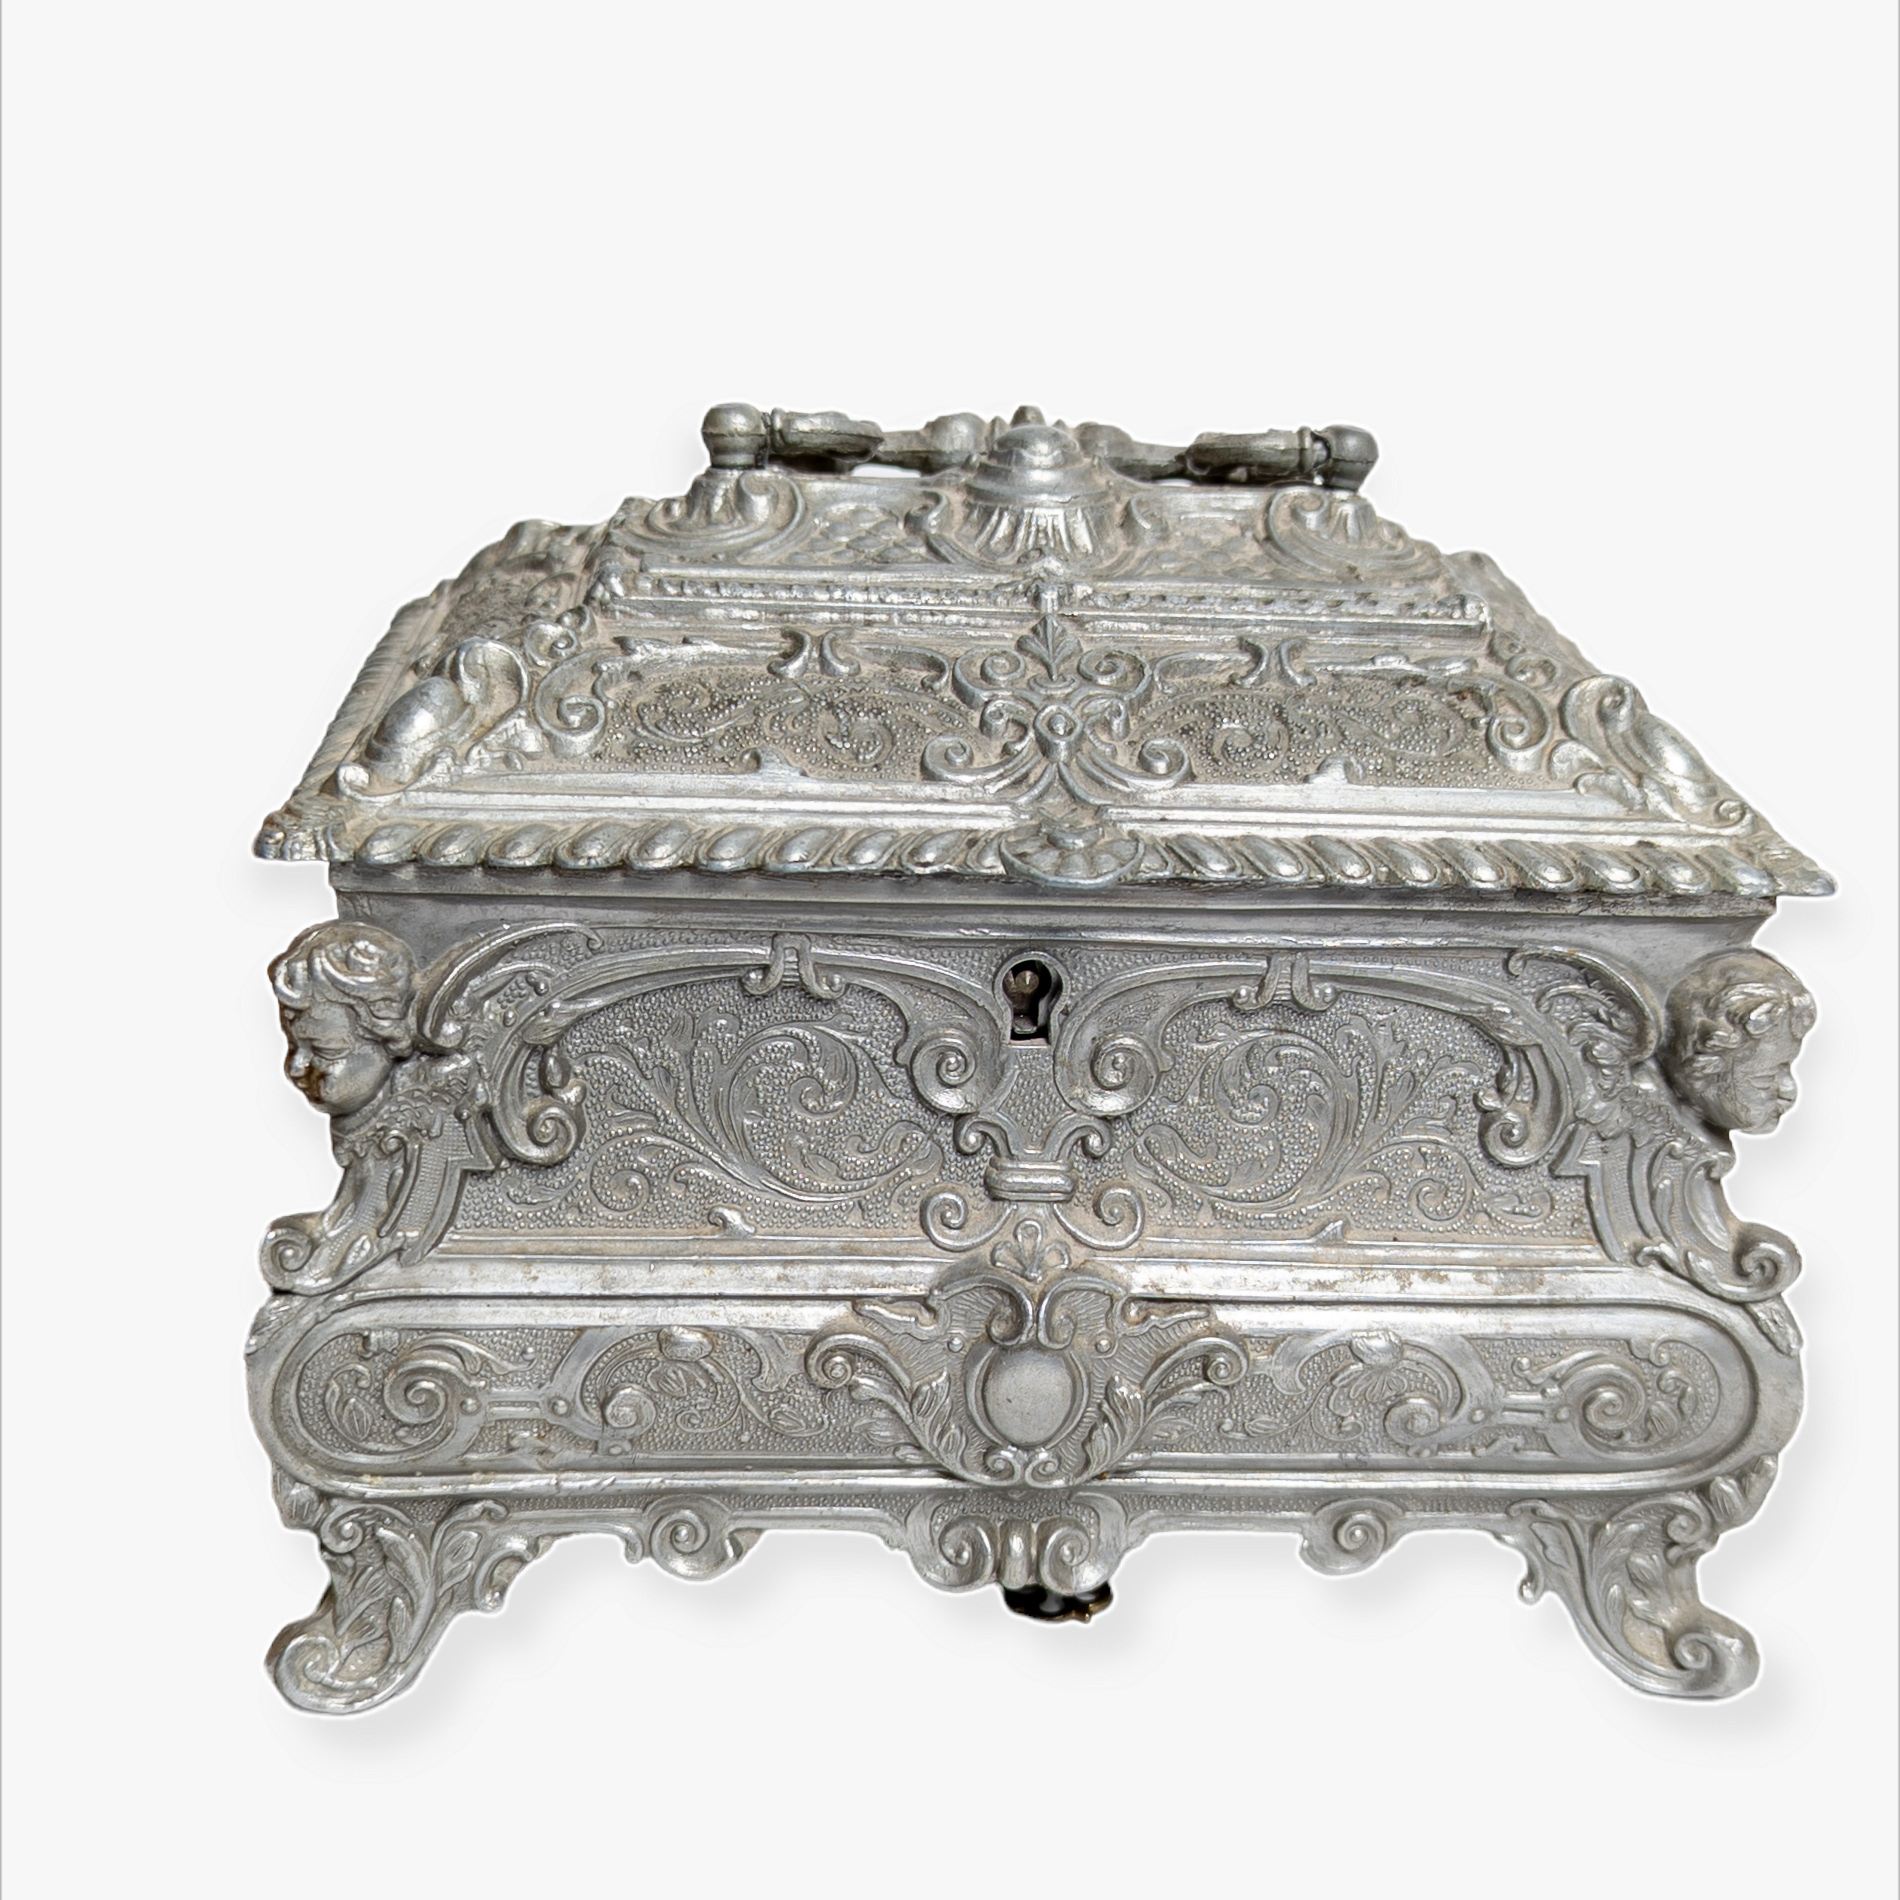 Antique 19th Century Ornate Pewter Jewelry Casket